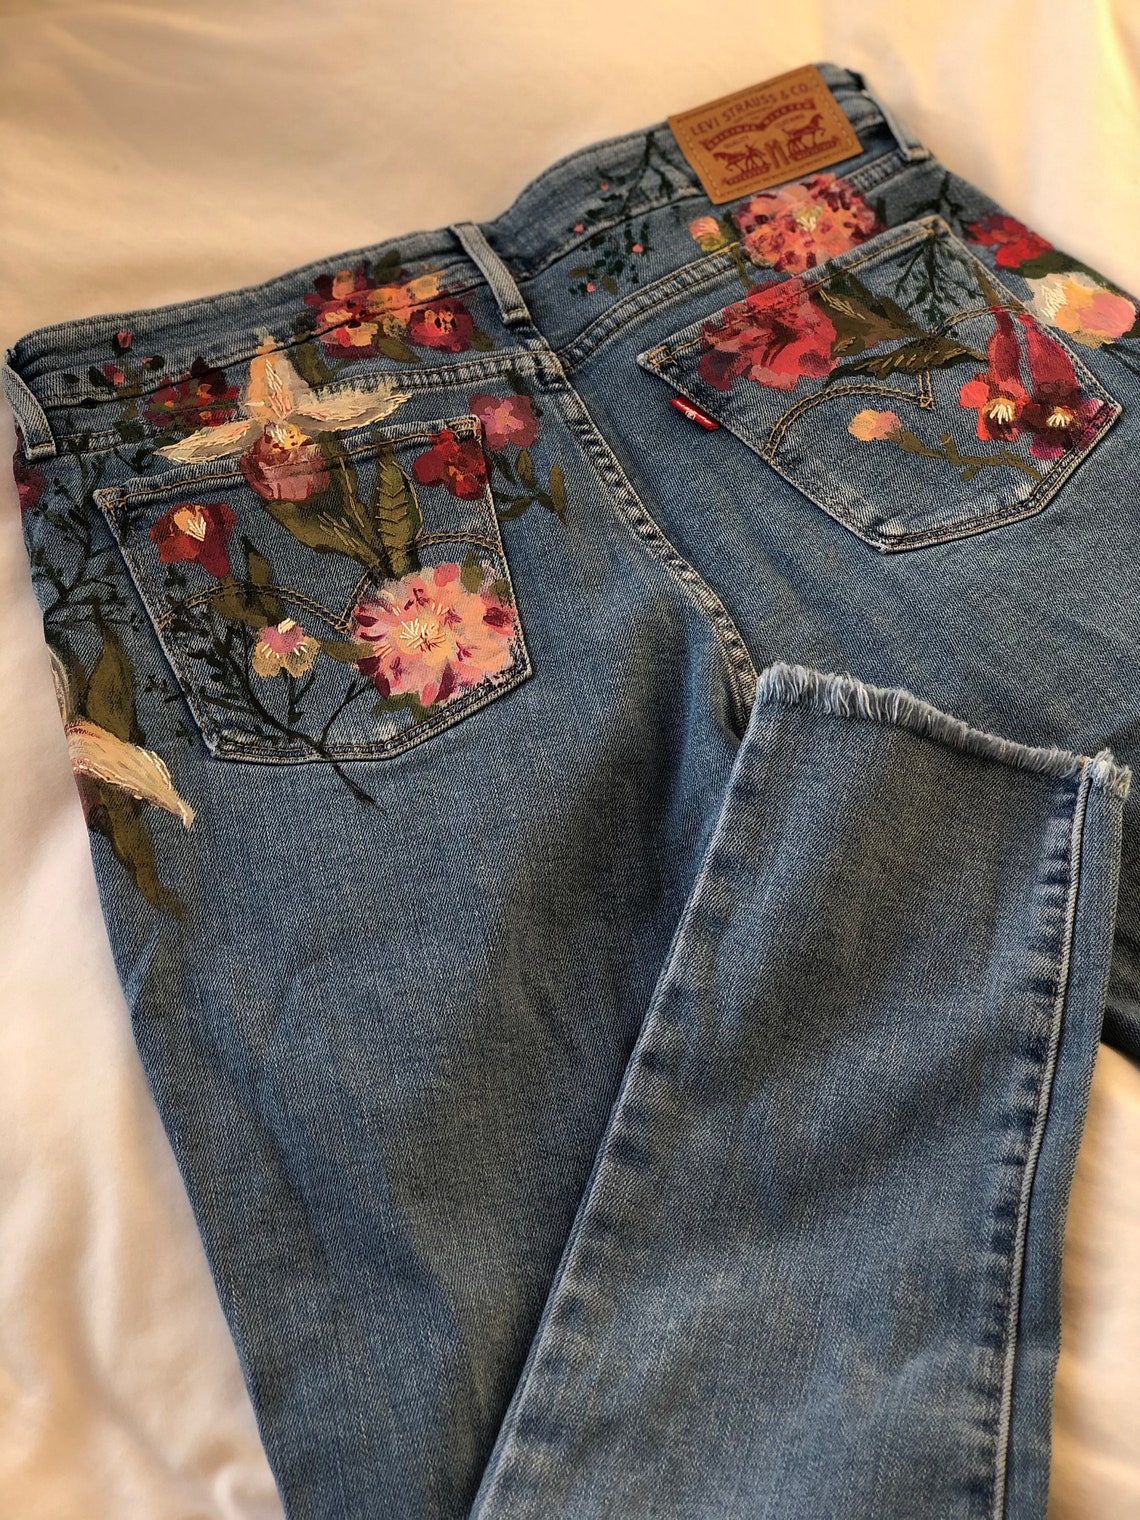 FLORAL JEANS CUSTOM Levis hand-painted and hand-embroidered | Etsy